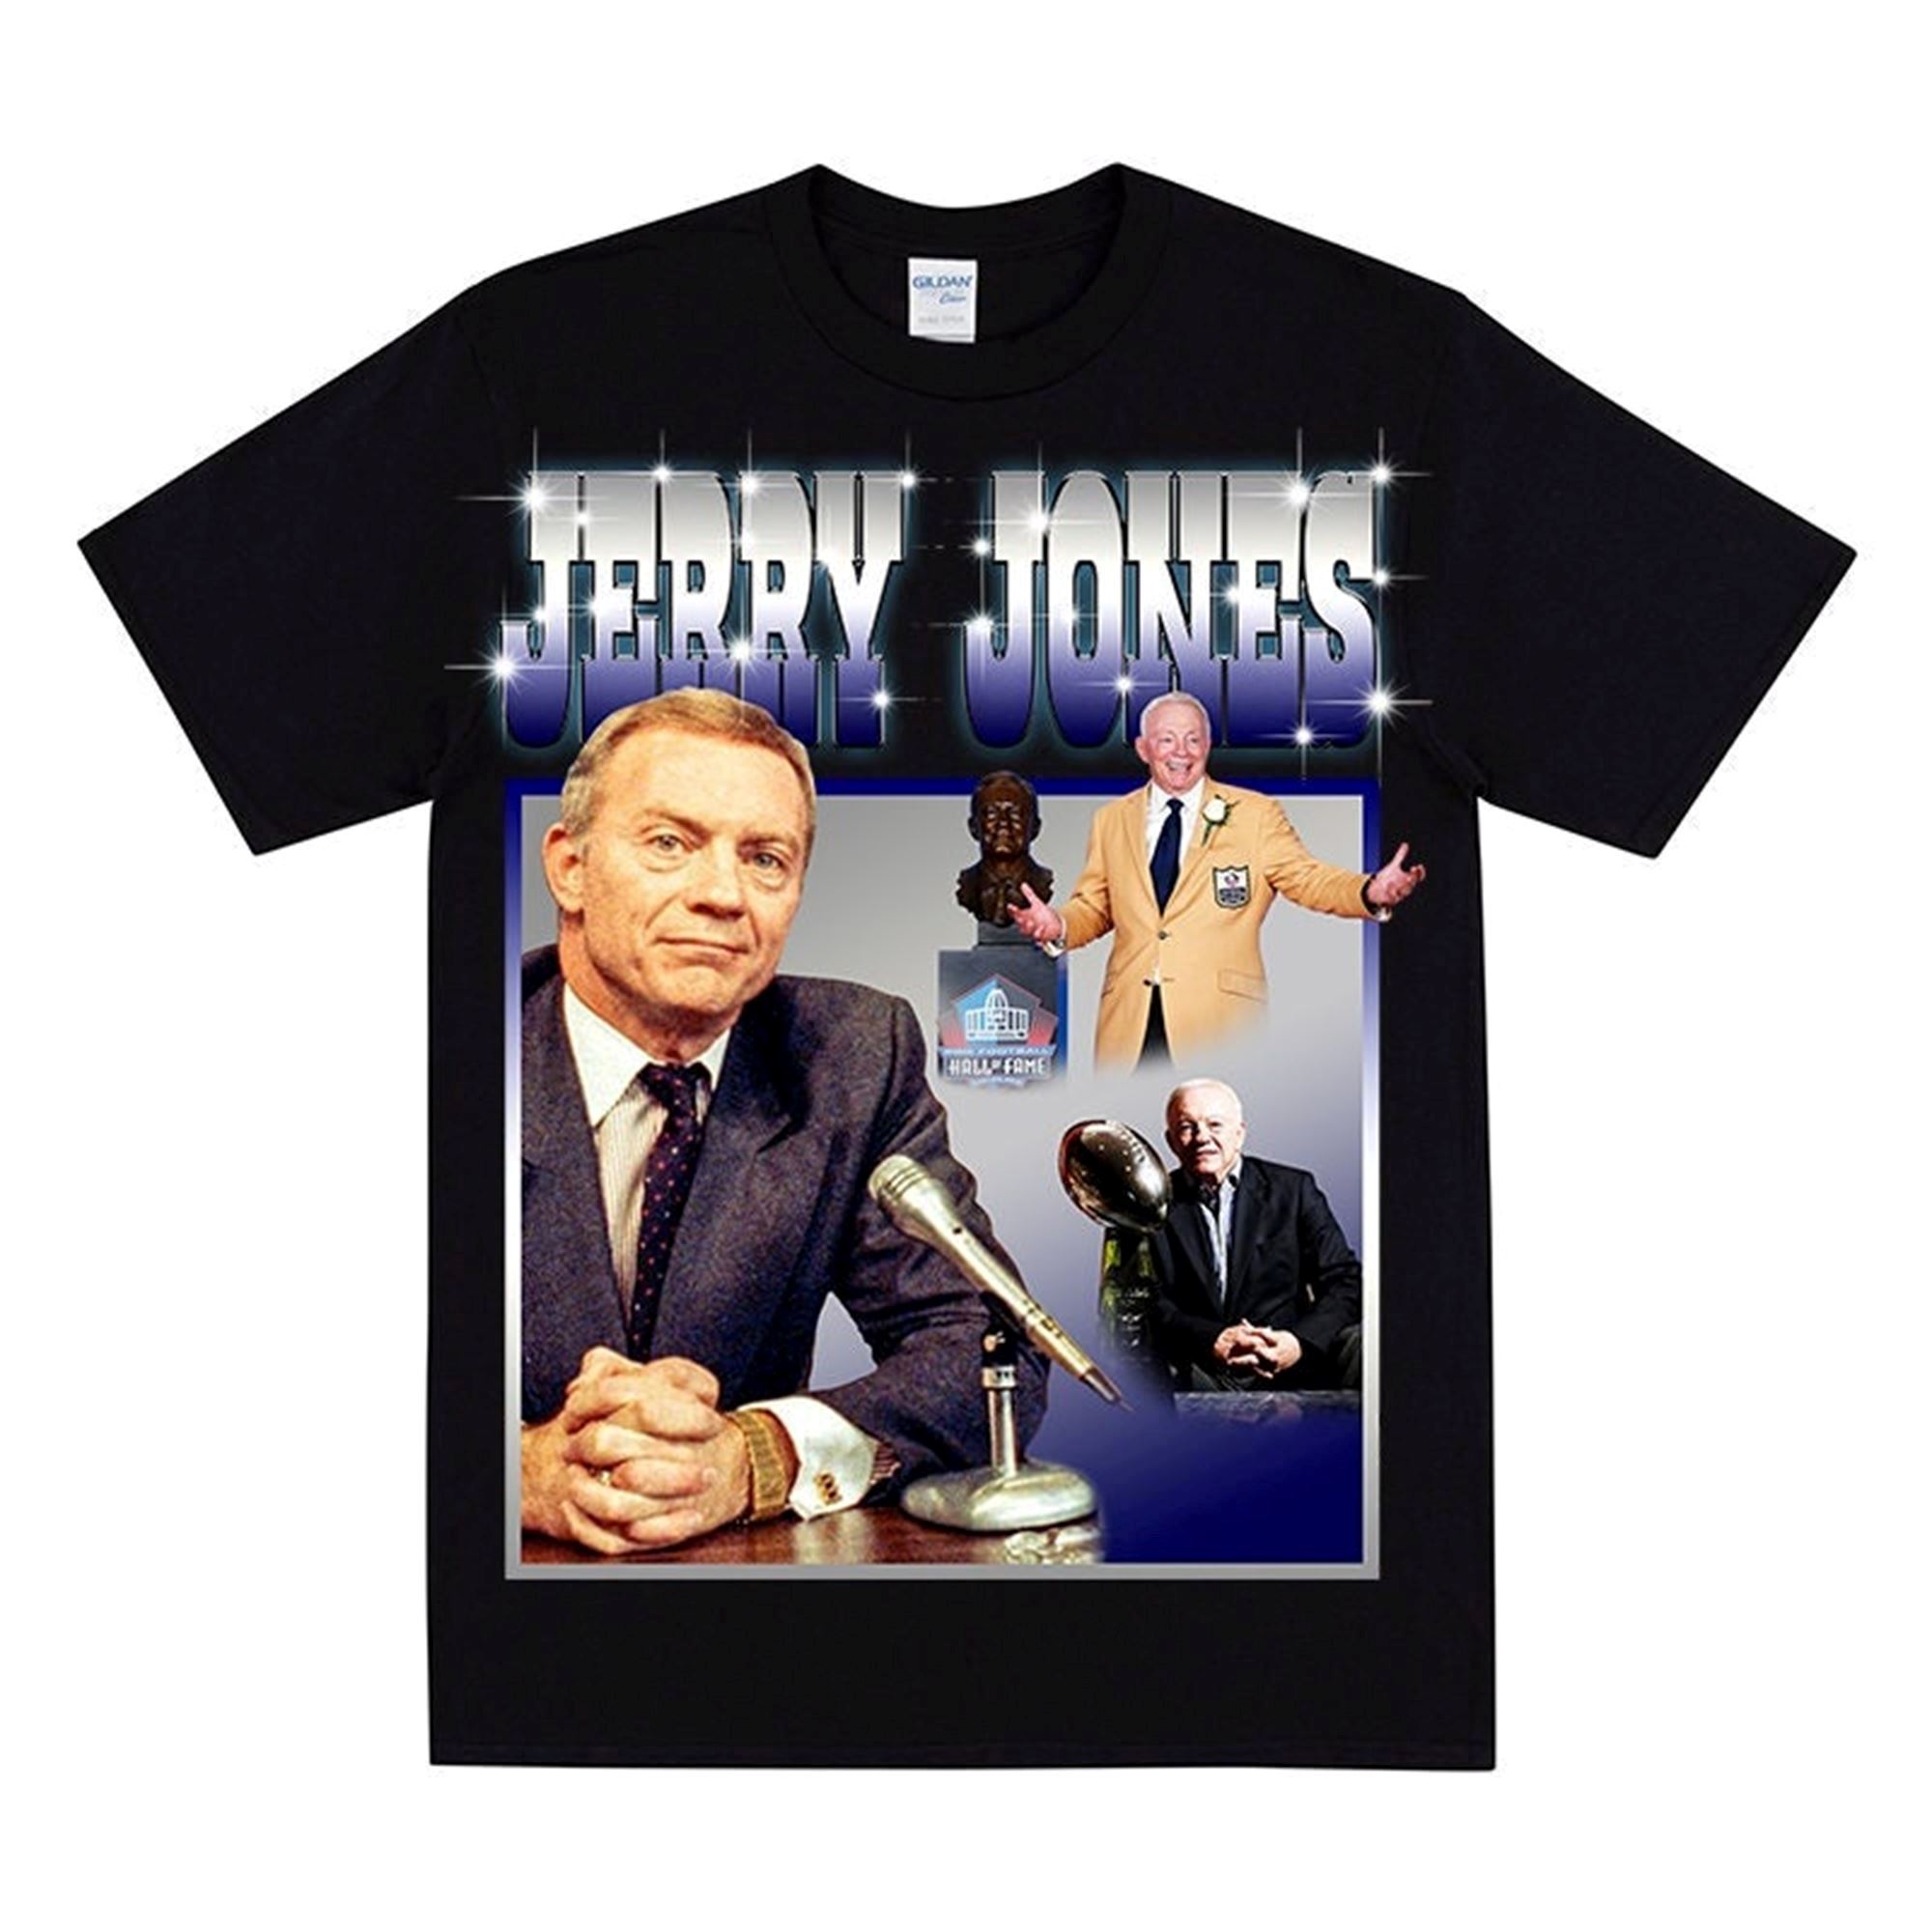 Best Jerry Jones Homage T-shirt For Sports Fans American Football Theme 90s Football Dynasty Football Team Owner 